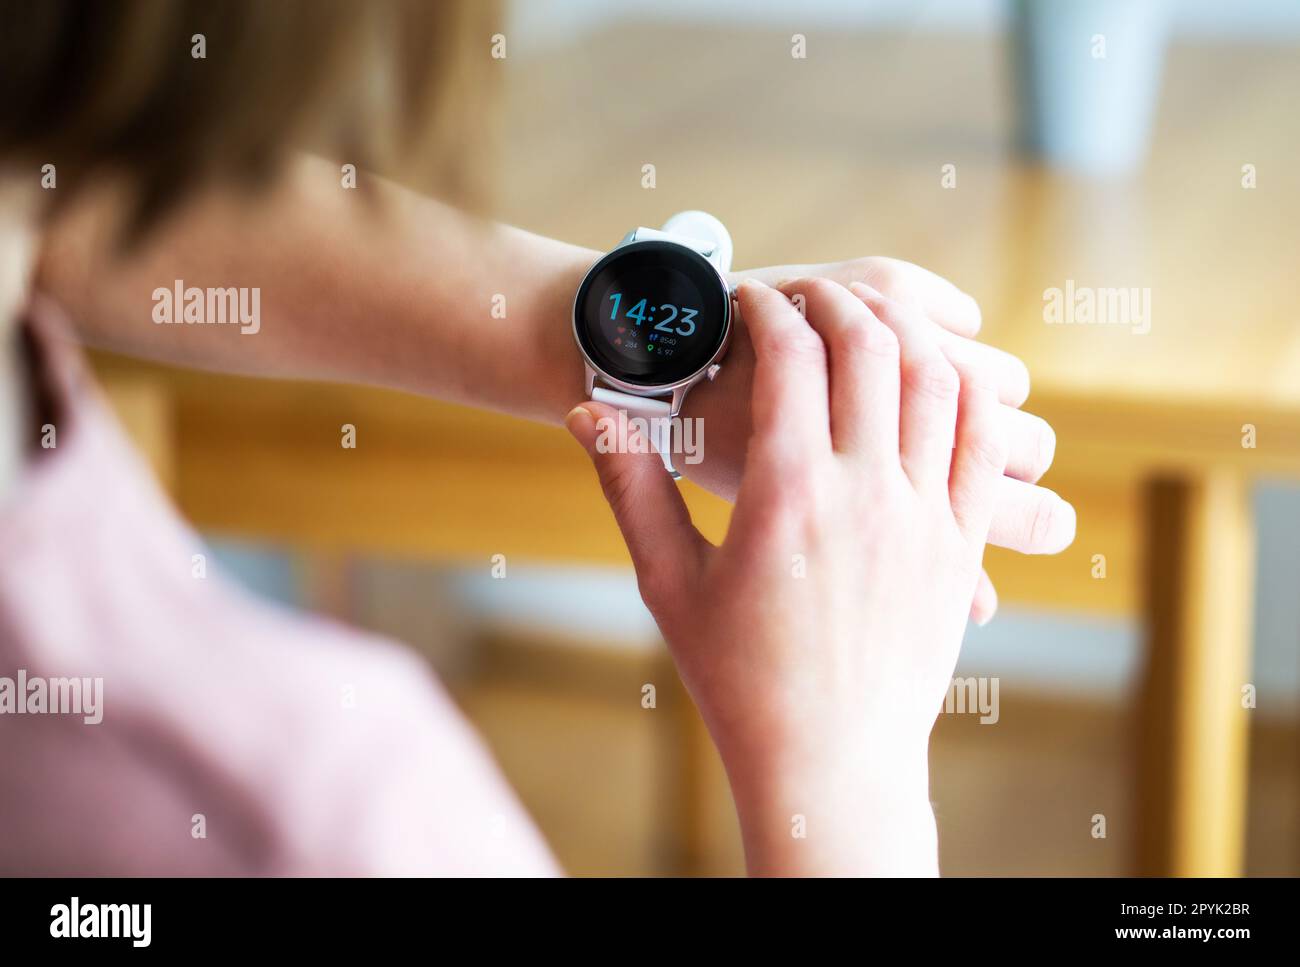 Hands of woman wearing smart watch. Technology, business and people concept. Modern lifestyle. Stock Photo